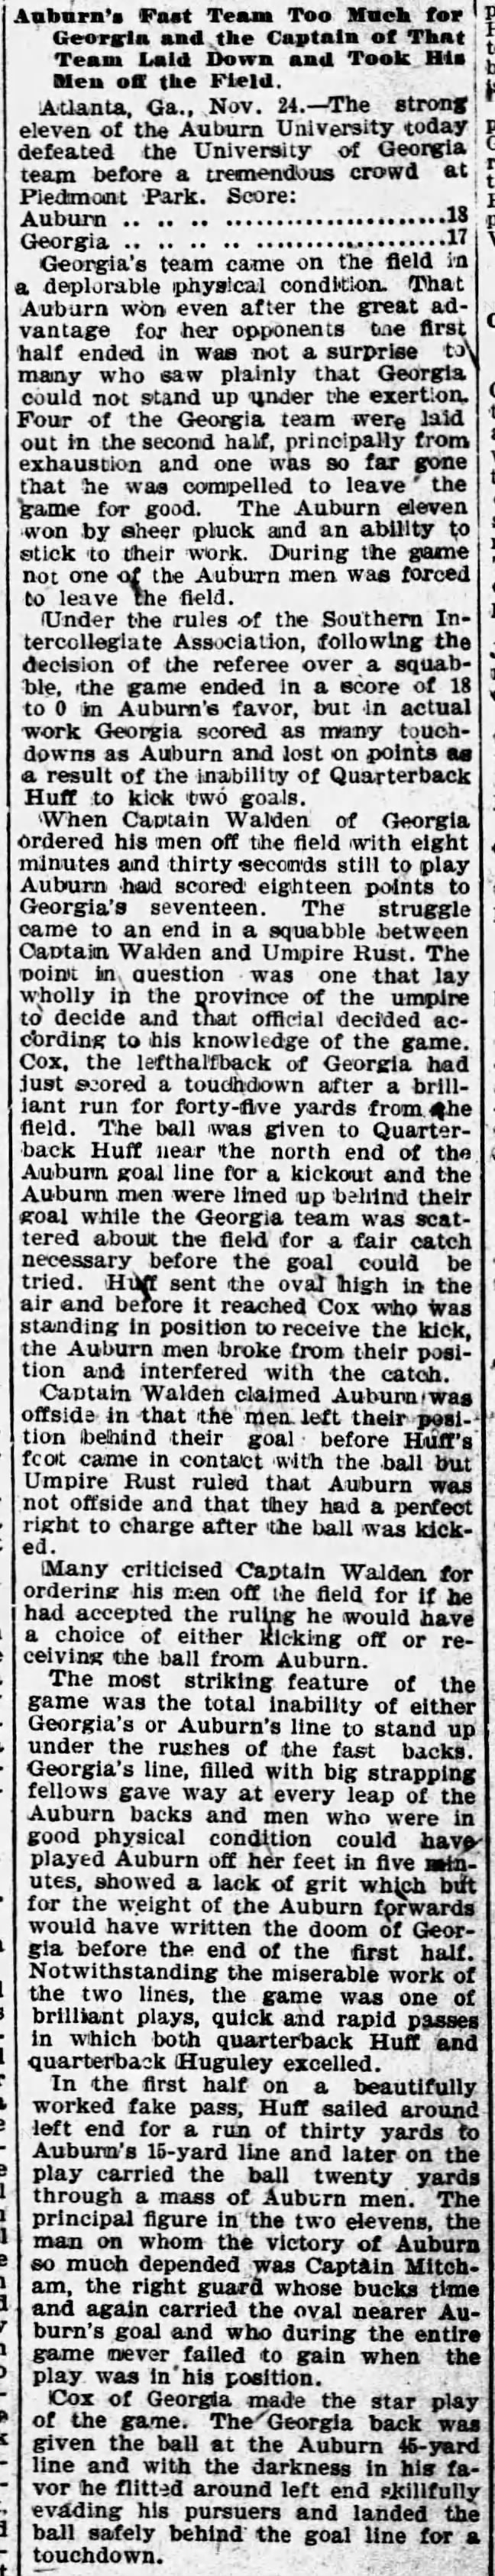 Auburn's fast team too much for Georgia and the captain of that team laid down and took his men off